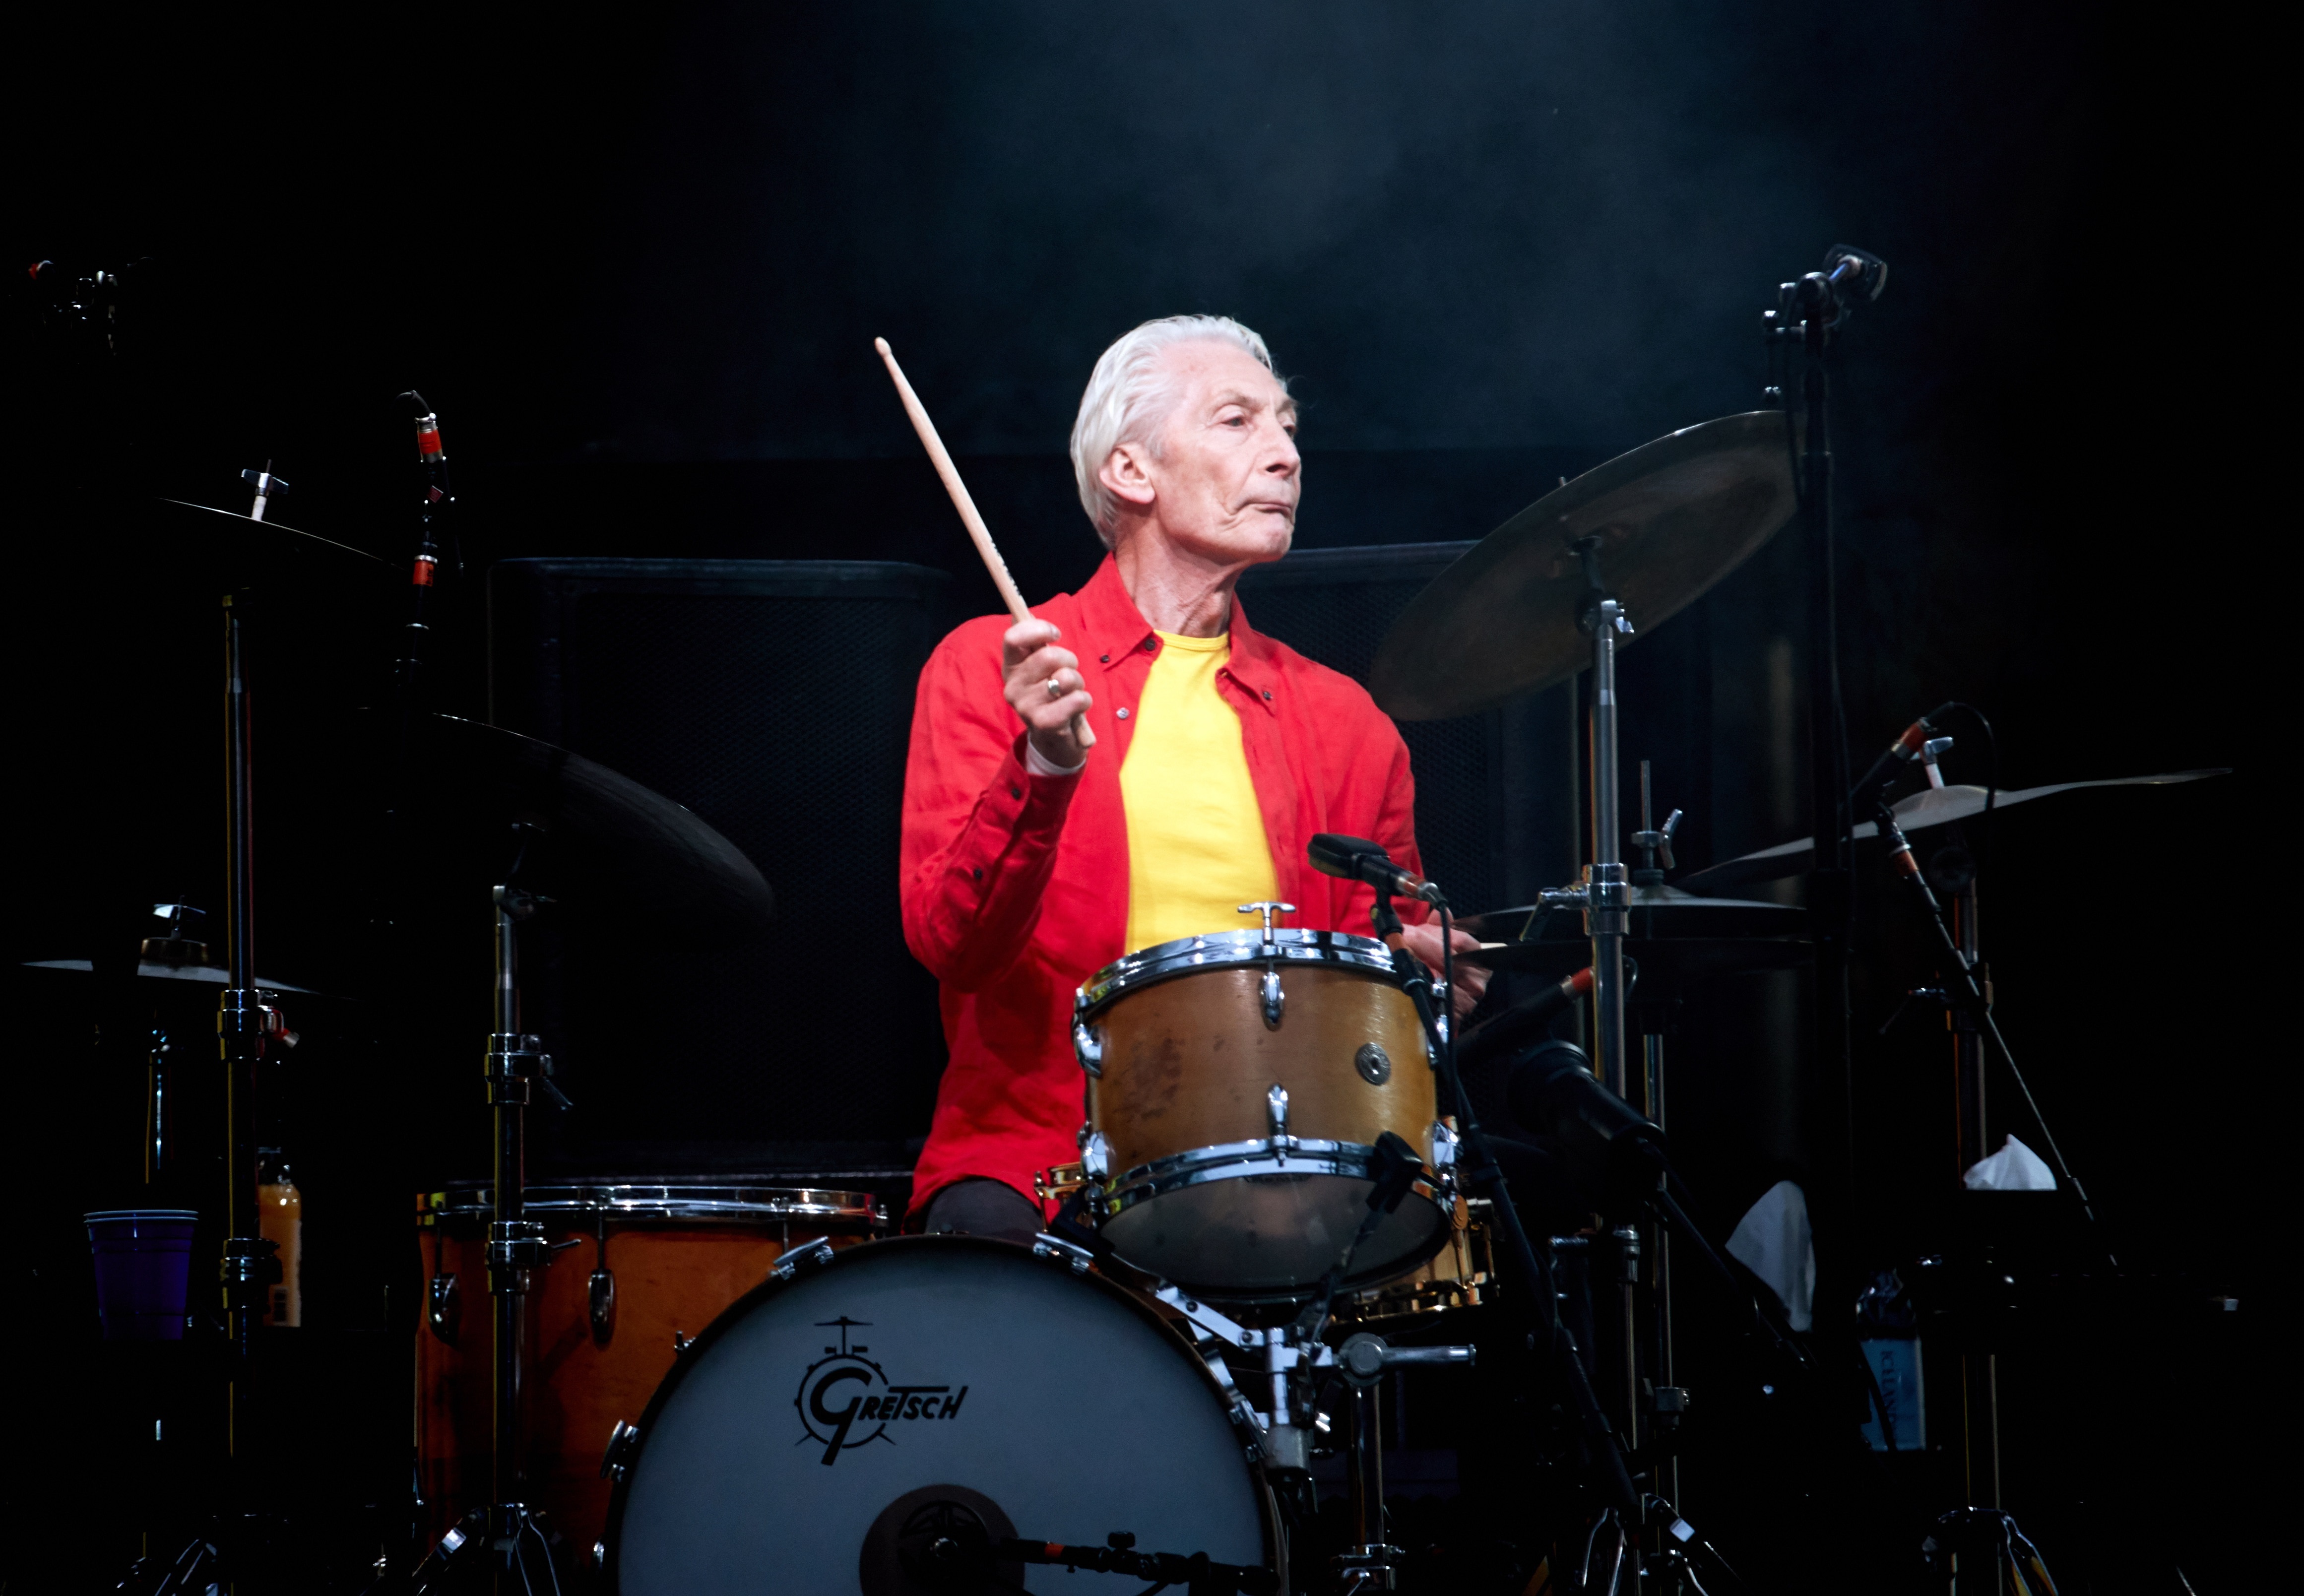 Berlin (Germany).- (FILE) - Charlie Watts of the British Rock band The Rolling Stones performs during a concert at the Olympiastadion in Berlin, Germany, 22 June 2018 (reissued 27 May 2021). Charlie Watts turns 80 on 02 June 2021. (Alemania, Reino Unido) EFE/EPA/HAYOUNG JEON *** Local Caption *** 54432630
